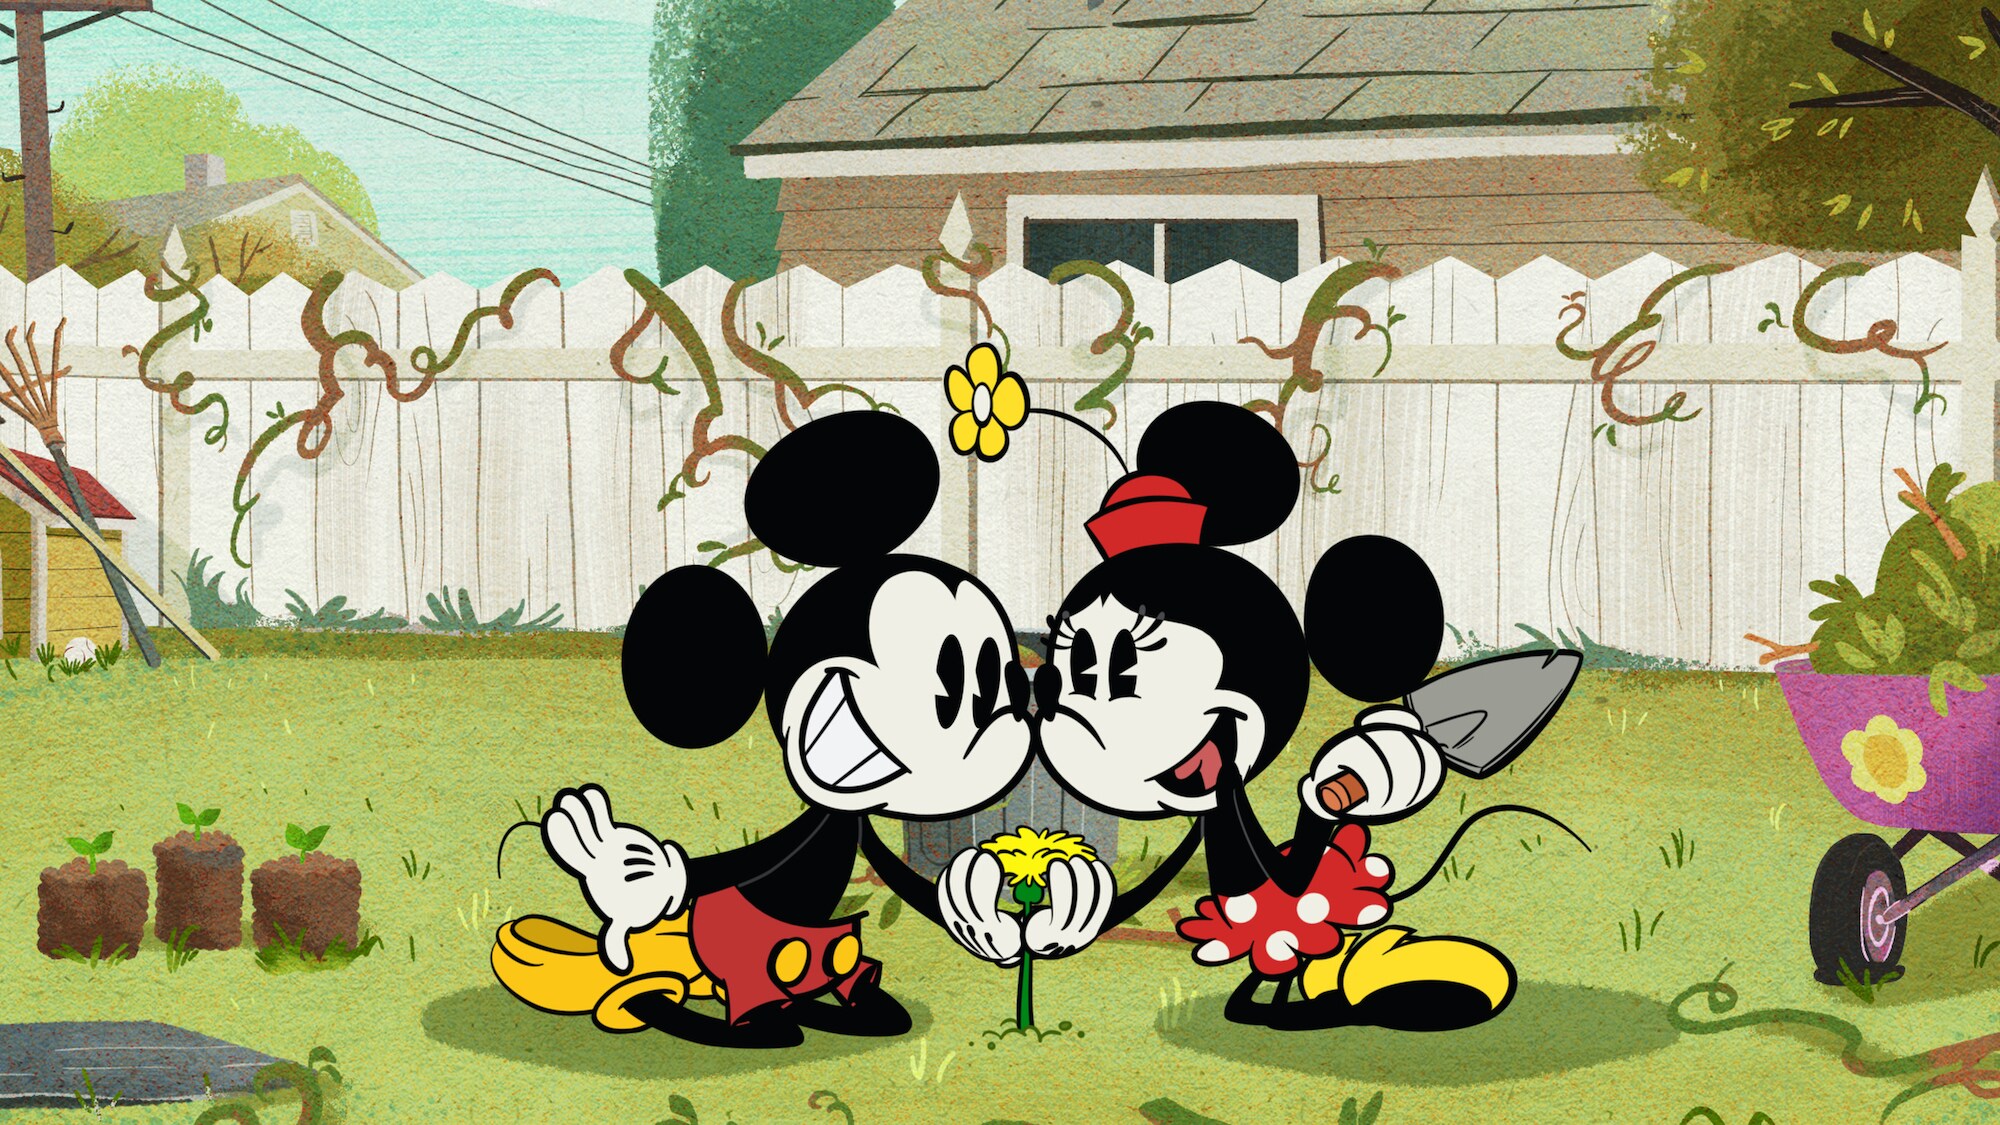 THE WONDERFUL WORLD OF MICKEY MOUSE - "The Wonderful Spring of Mickey Mouse" (Disney)  MICKEY MOUSE, MINNIE MOUSE